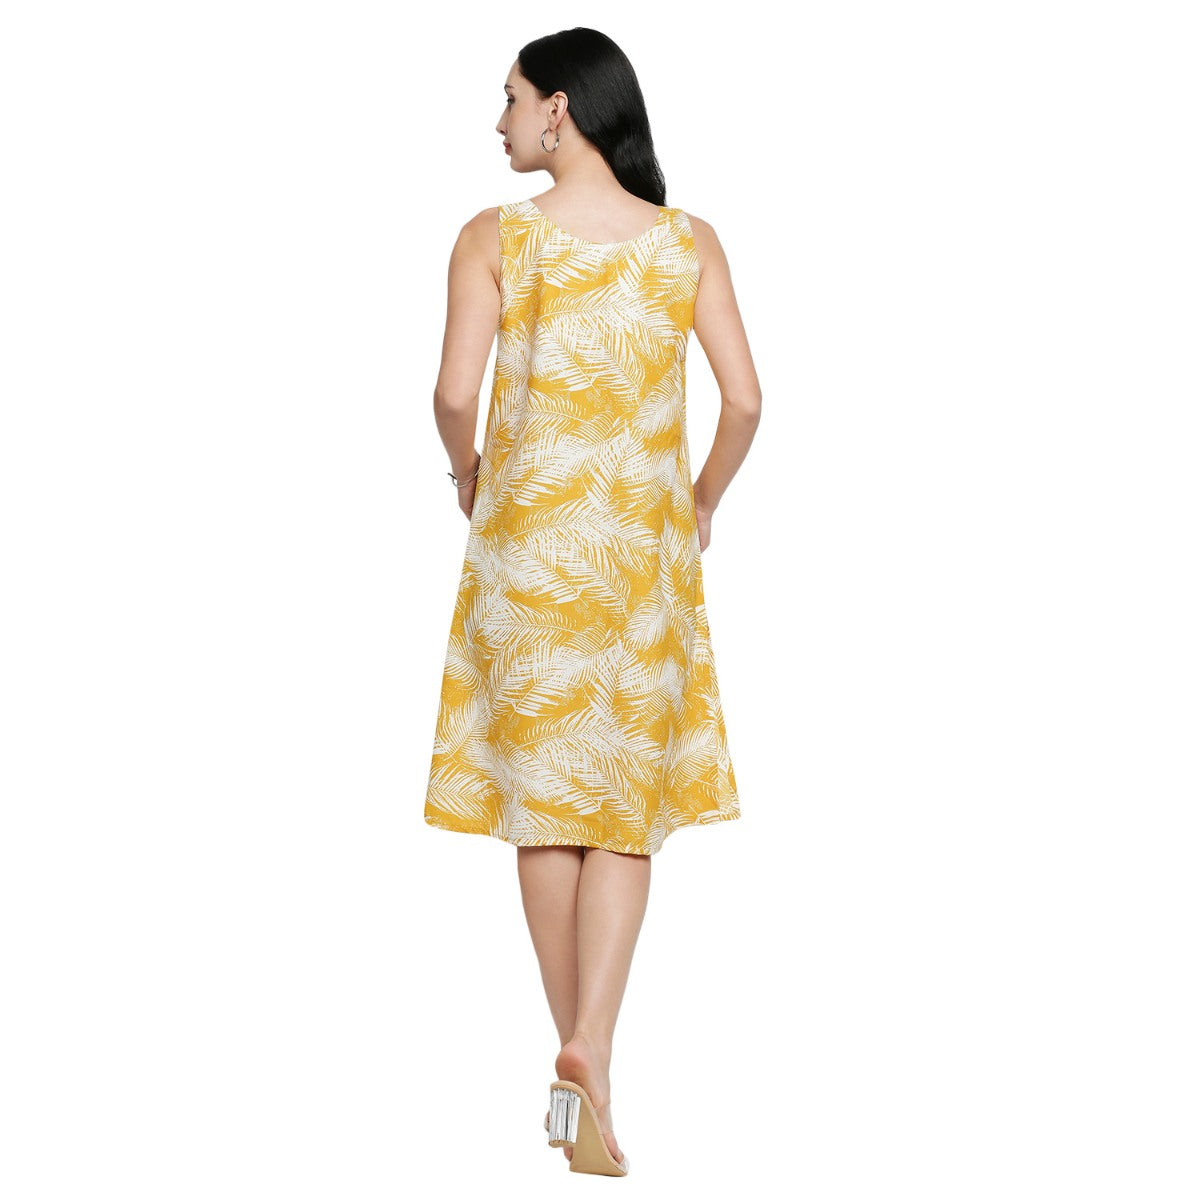 Mantra yellow printed A line dress